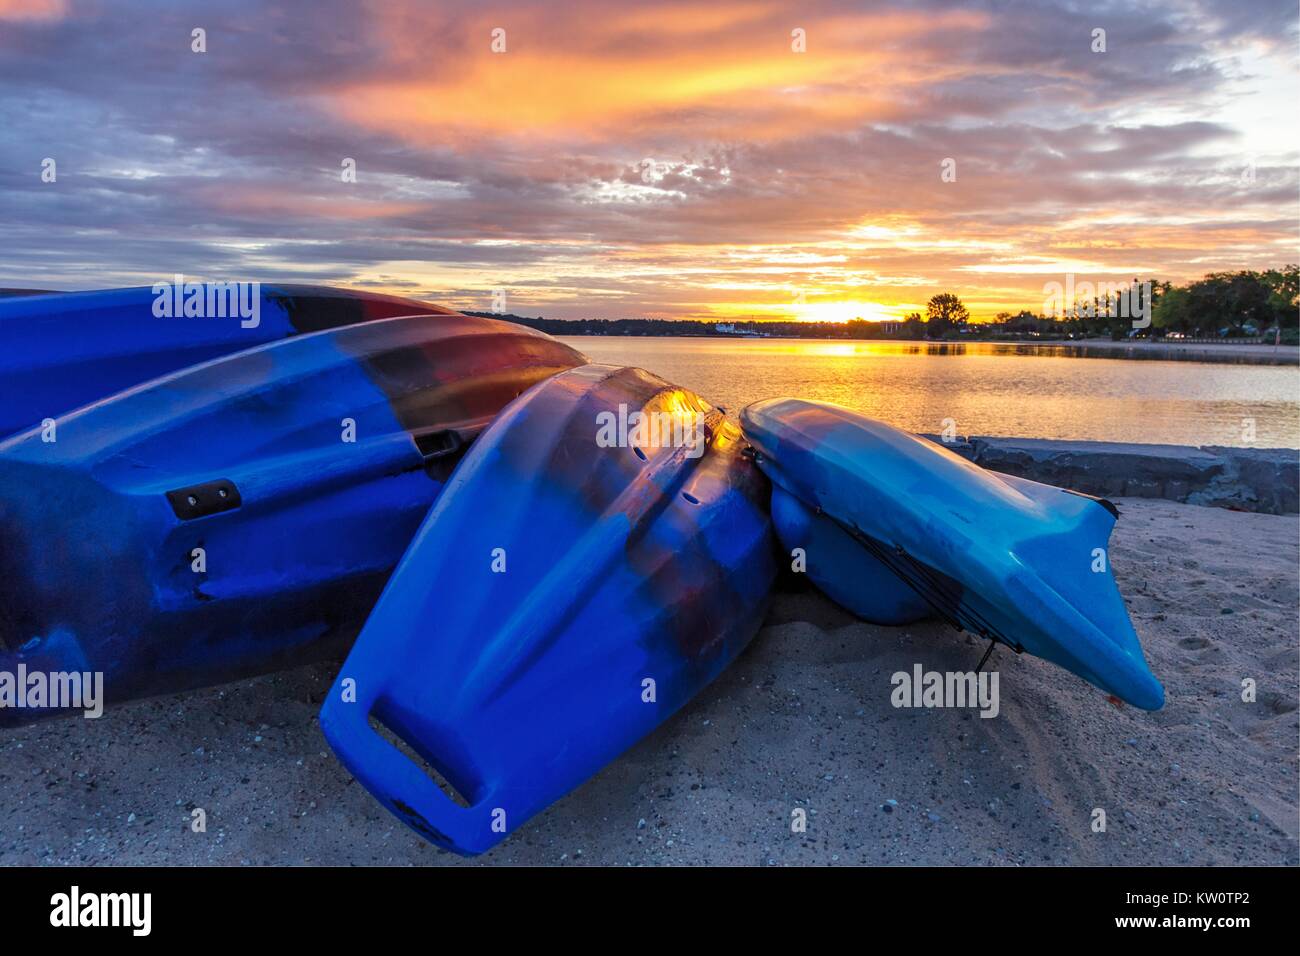 Summer Kayak Sunrise. Row of colorful Kayaks line the shore of a sandy beach as sunrise colors reflect in the calm waters of Lake Michigan. Stock Photo